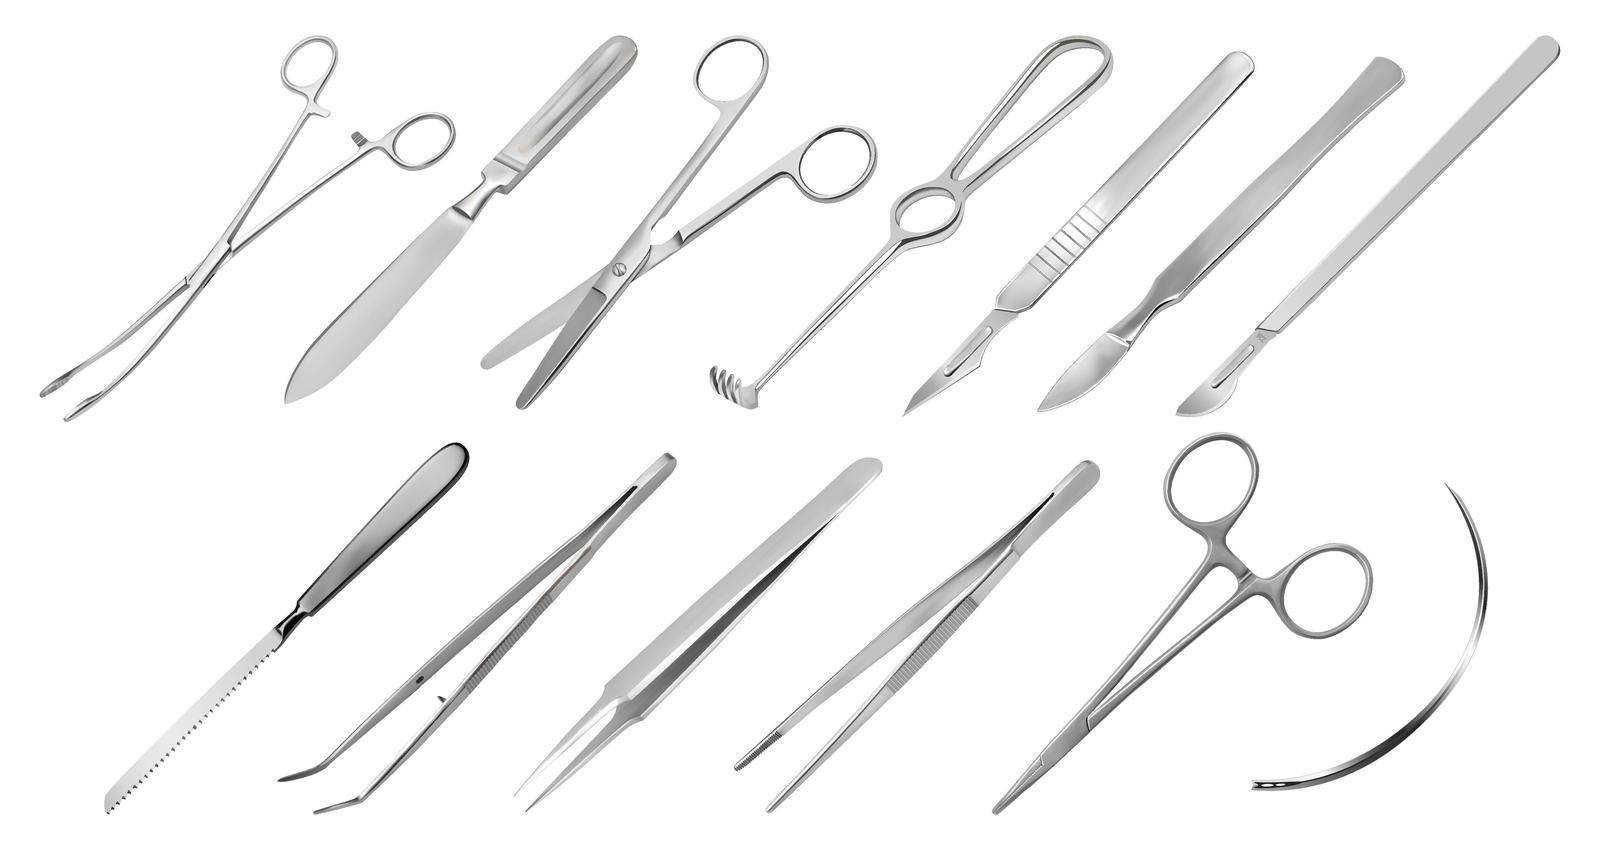 Surgical instruments. Different types of tweezers, scalpels, Liston s amputation knife, clip with fastener, straight scissors, Folkmann s jagged hook, Meyer s forceps, surgical needle, Langenbeck saw